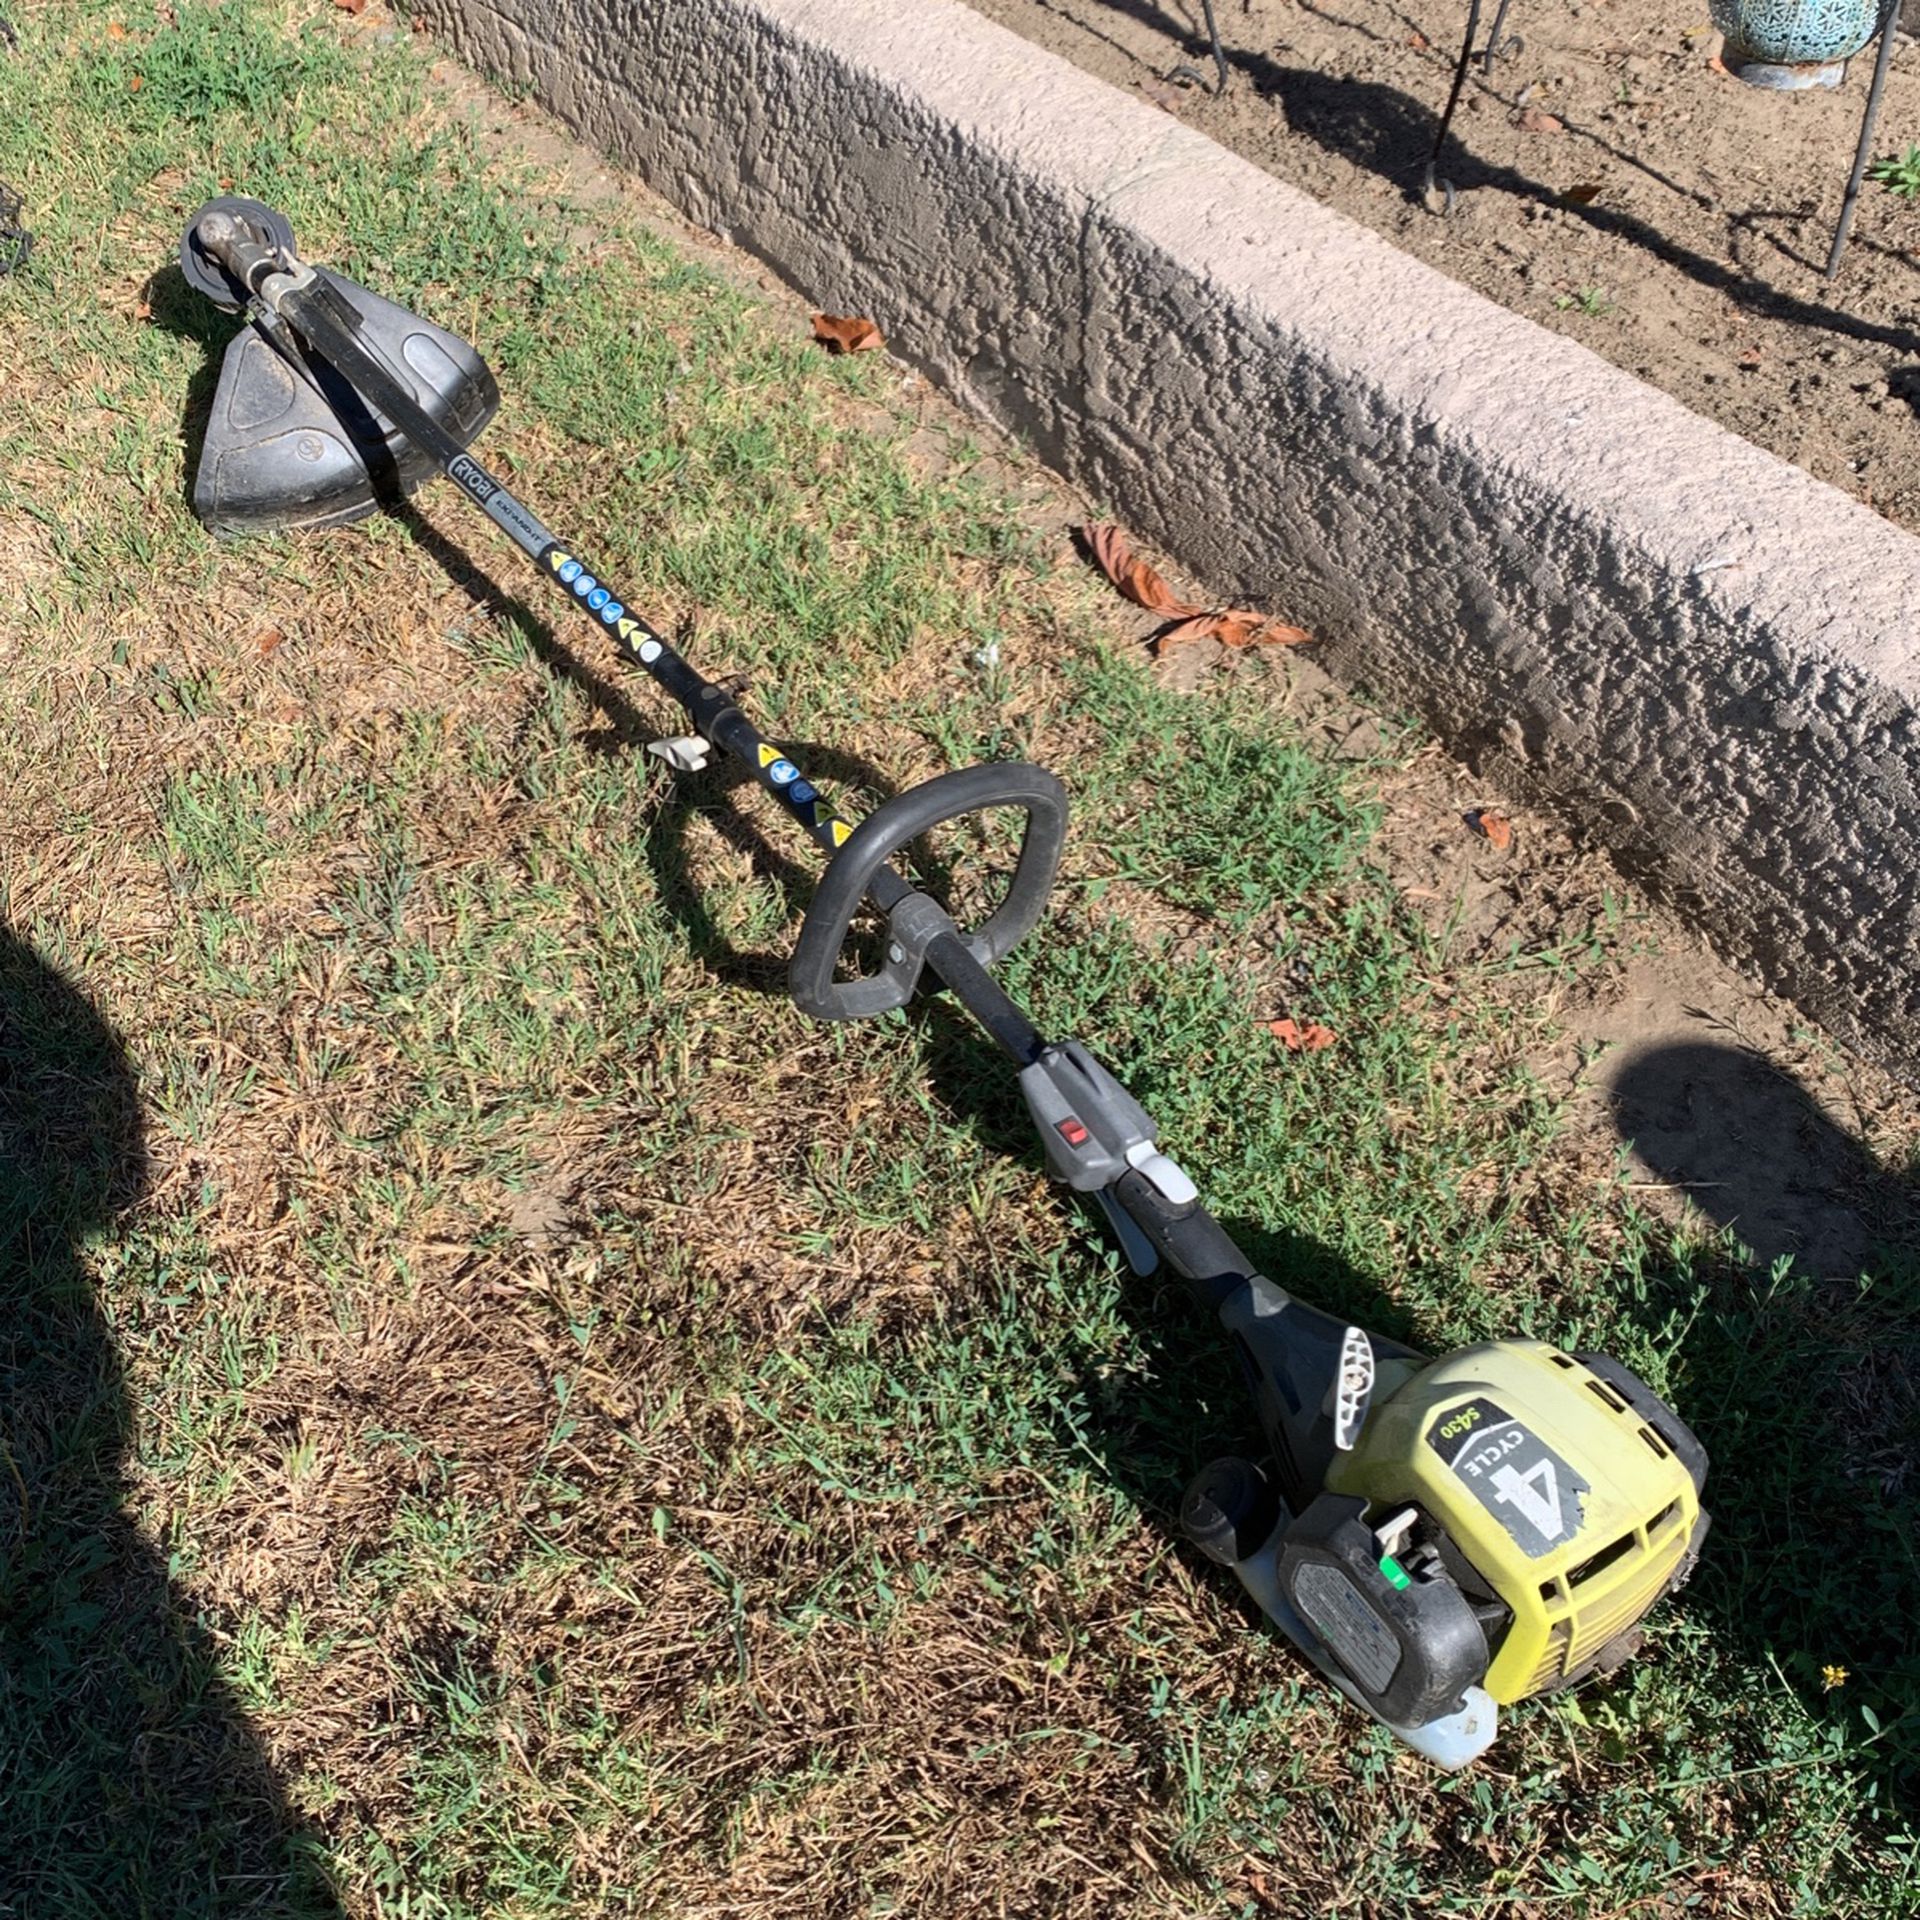 Ryobi S430 Weed Eater Used For Sale In Anaheim Ca Offerup